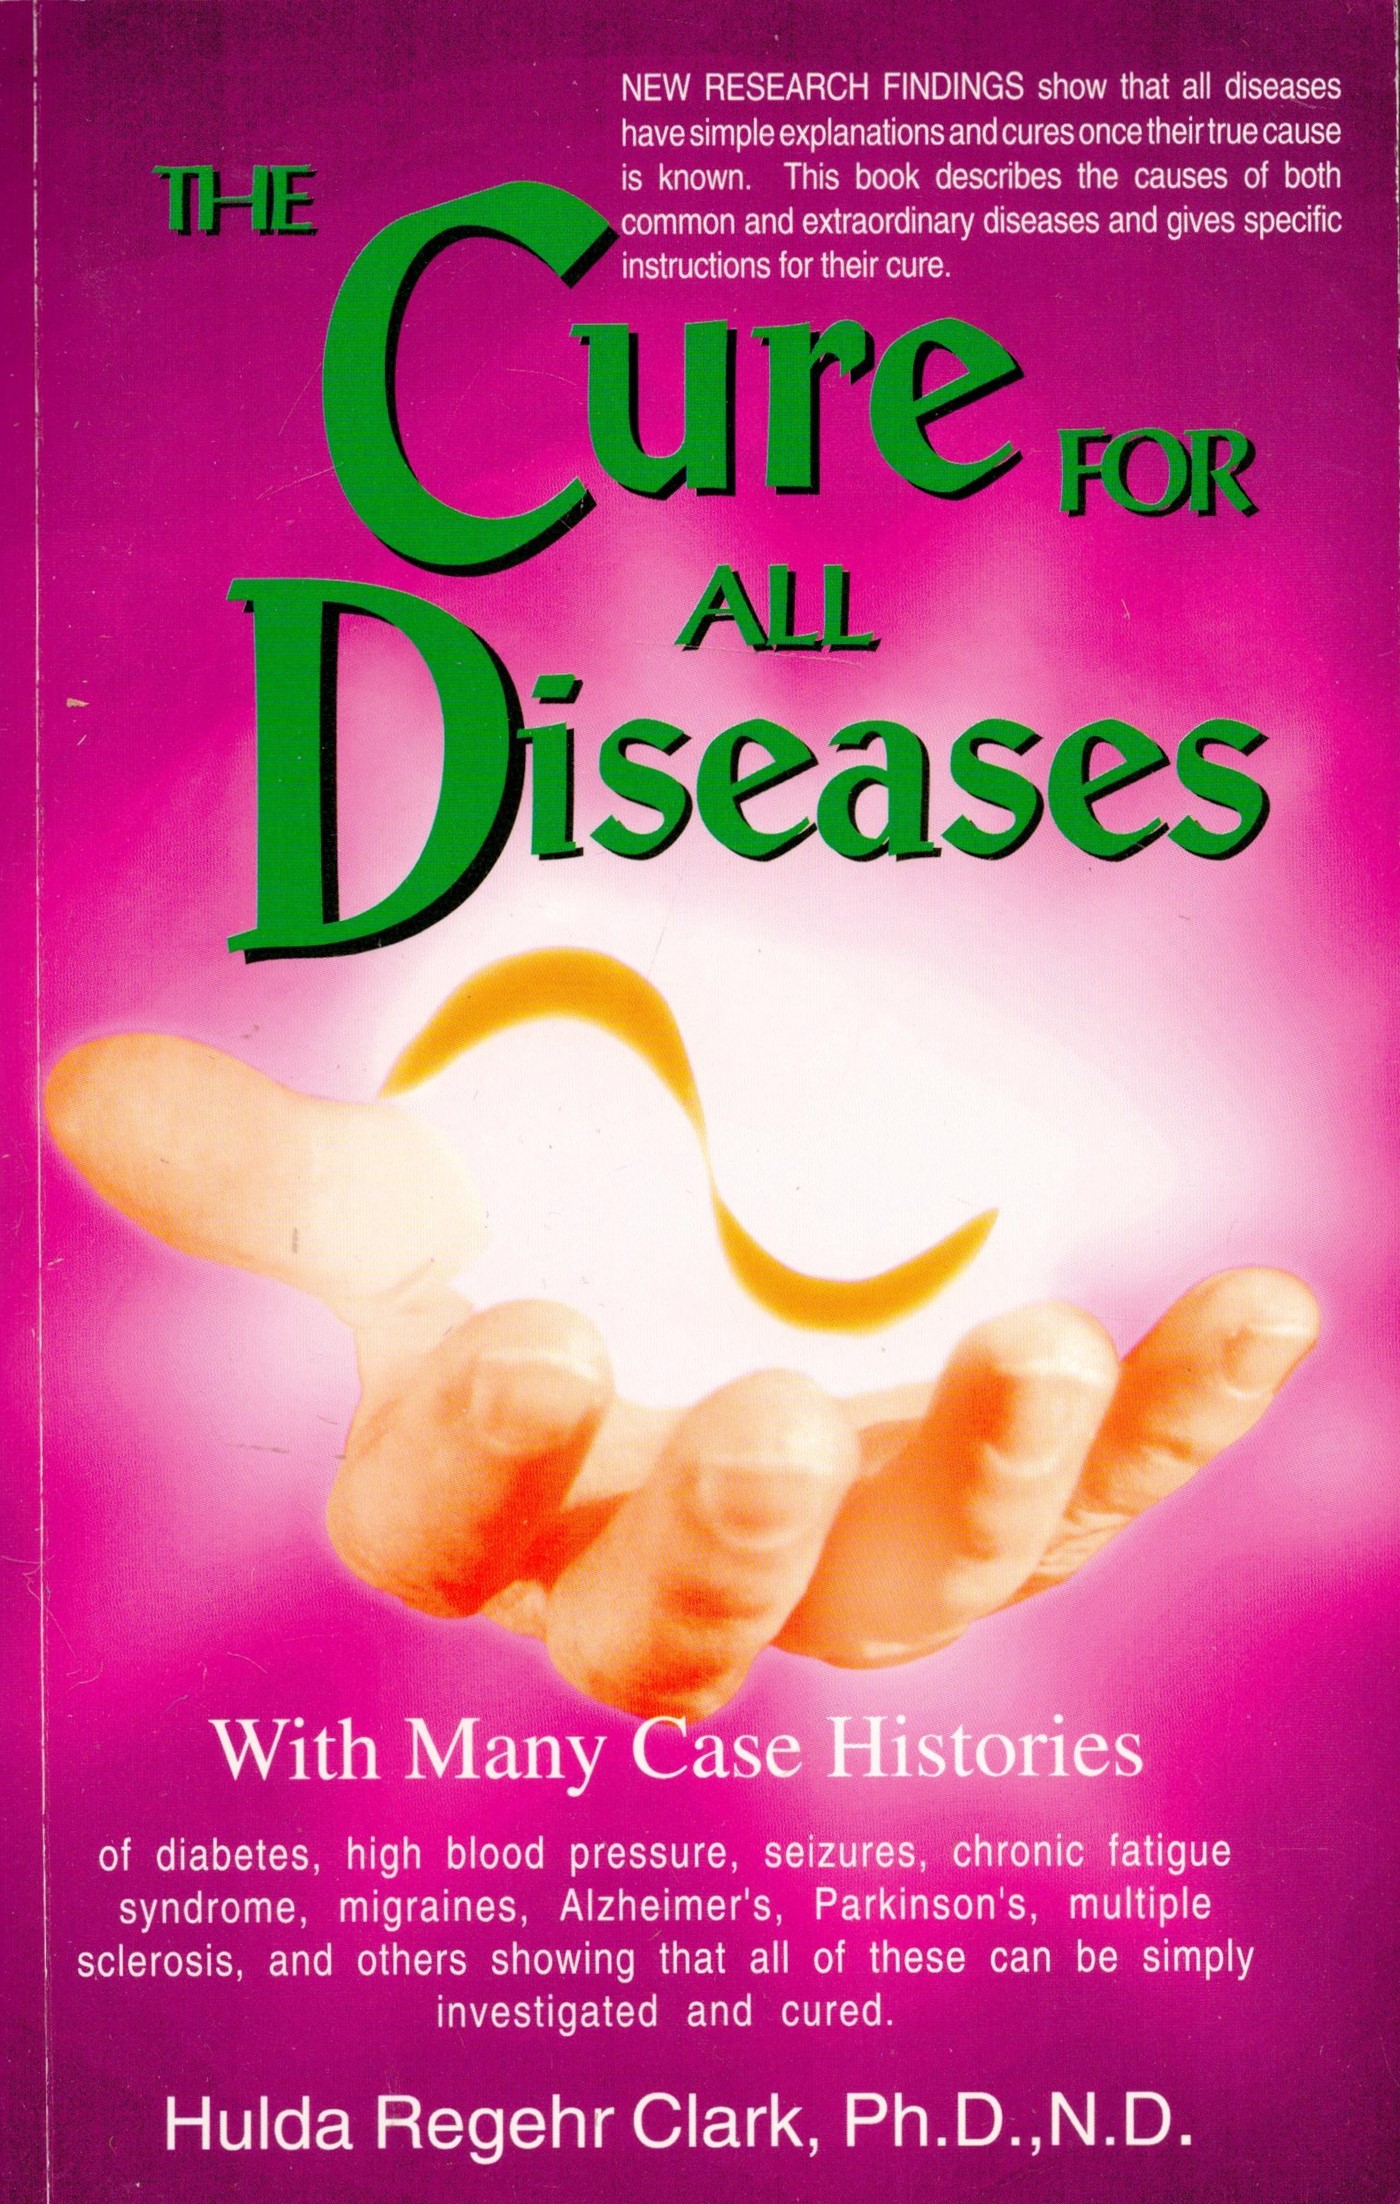 The Cure For All Diseases by Hulda Regehr Clark Softback Book 1995 First Edition published by New